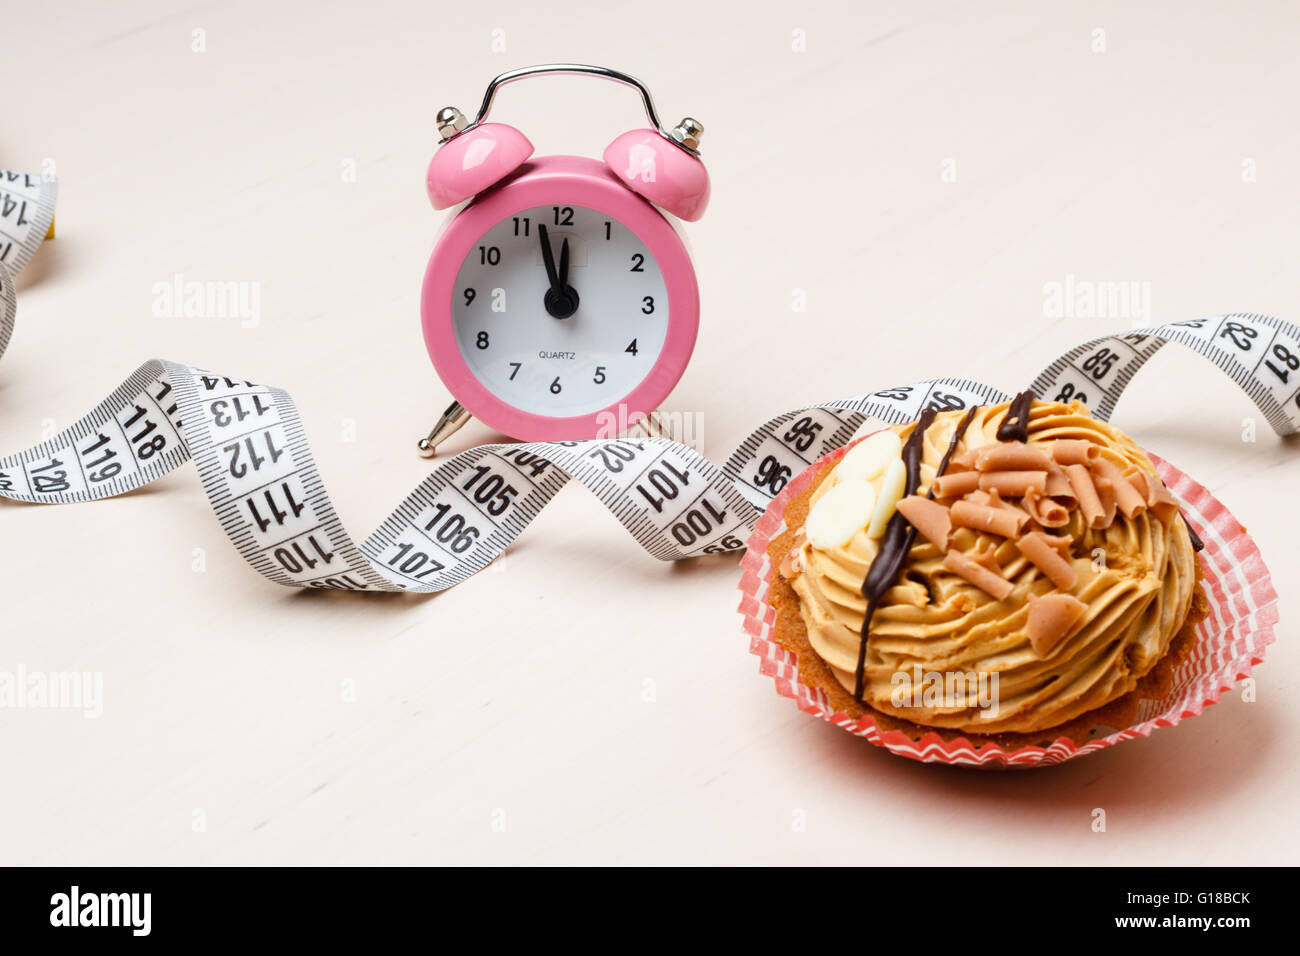 Gluttony and not eat junk sugar foods concept. Time for slimming. Cake cupcake measuring tape and alarm clock on kitchen table Stock Photo